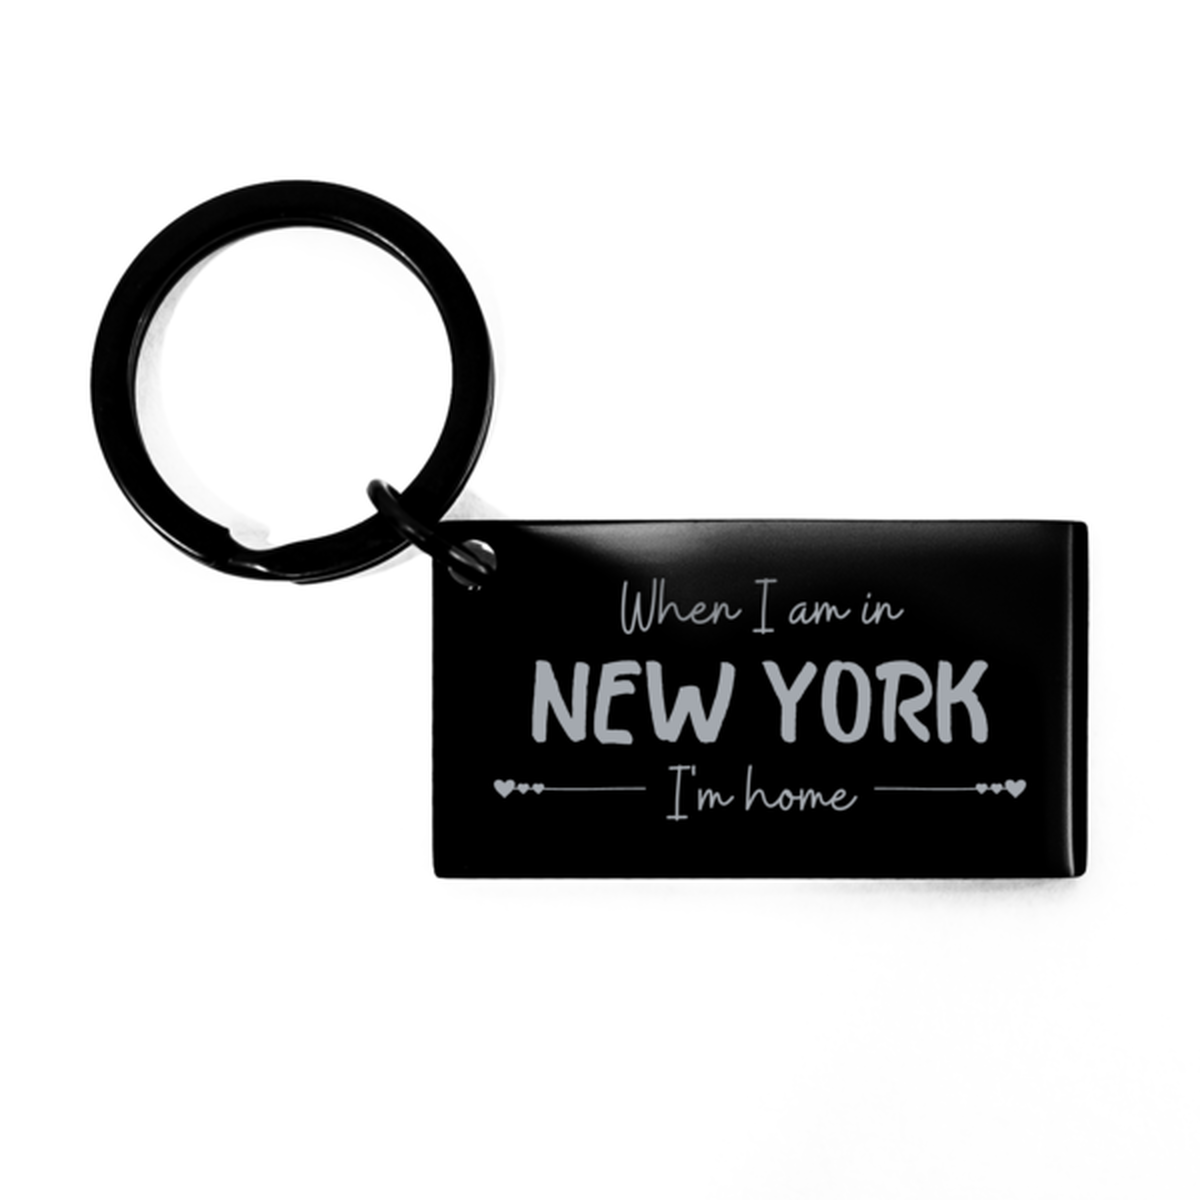 When I am in New York I'm home Keychain, Cheap Gifts For New York, State New York Birthday Gifts for Friends Coworker